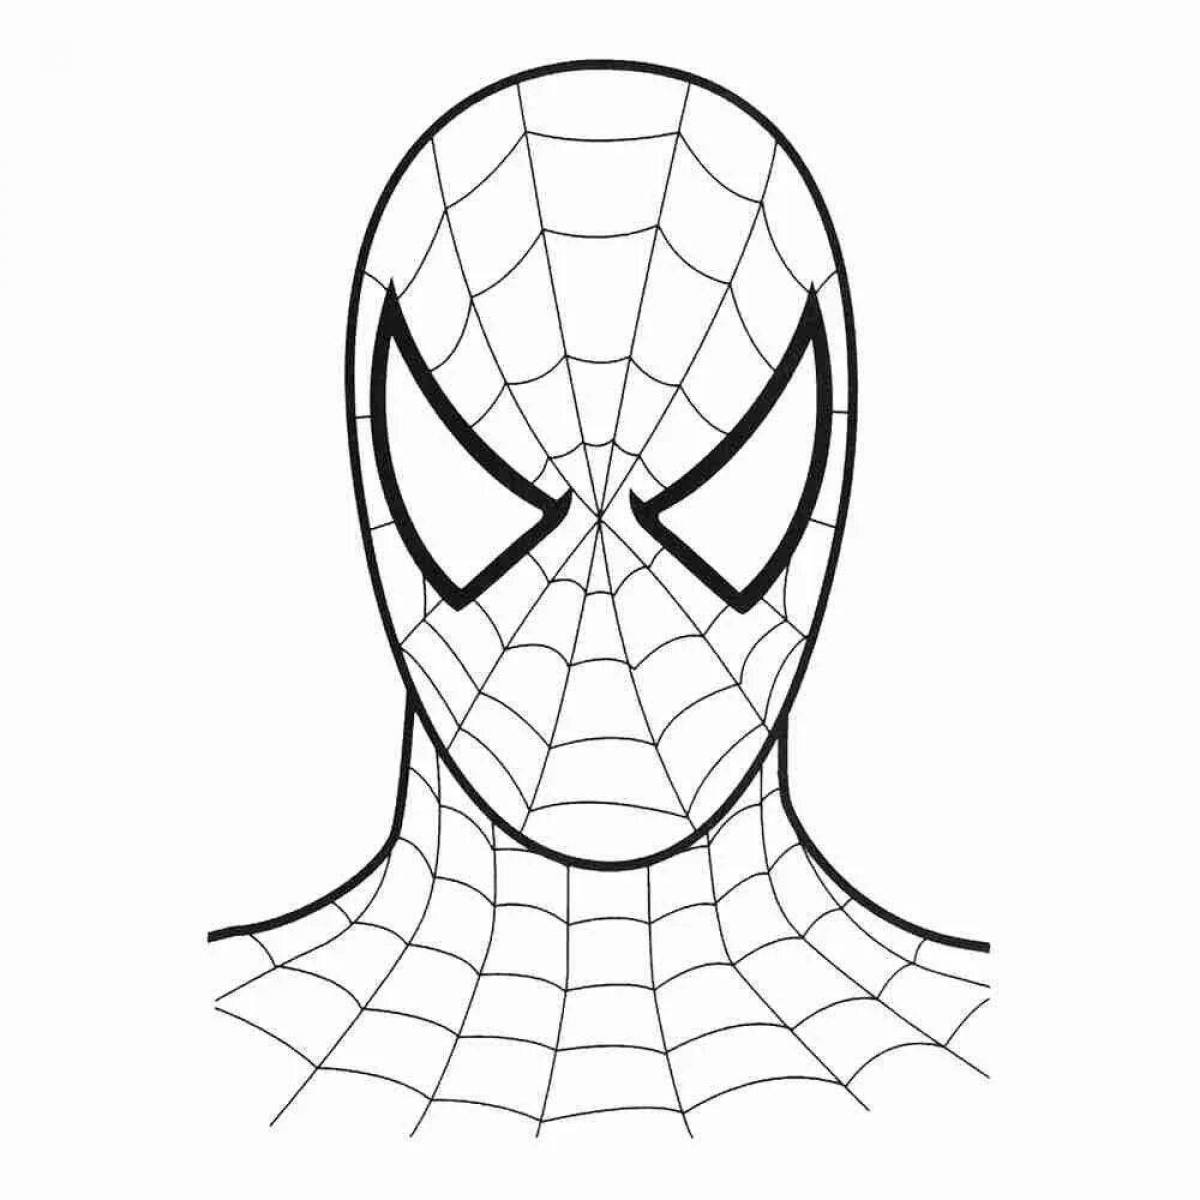 Tobey Maguire's amazing spider-man coloring book